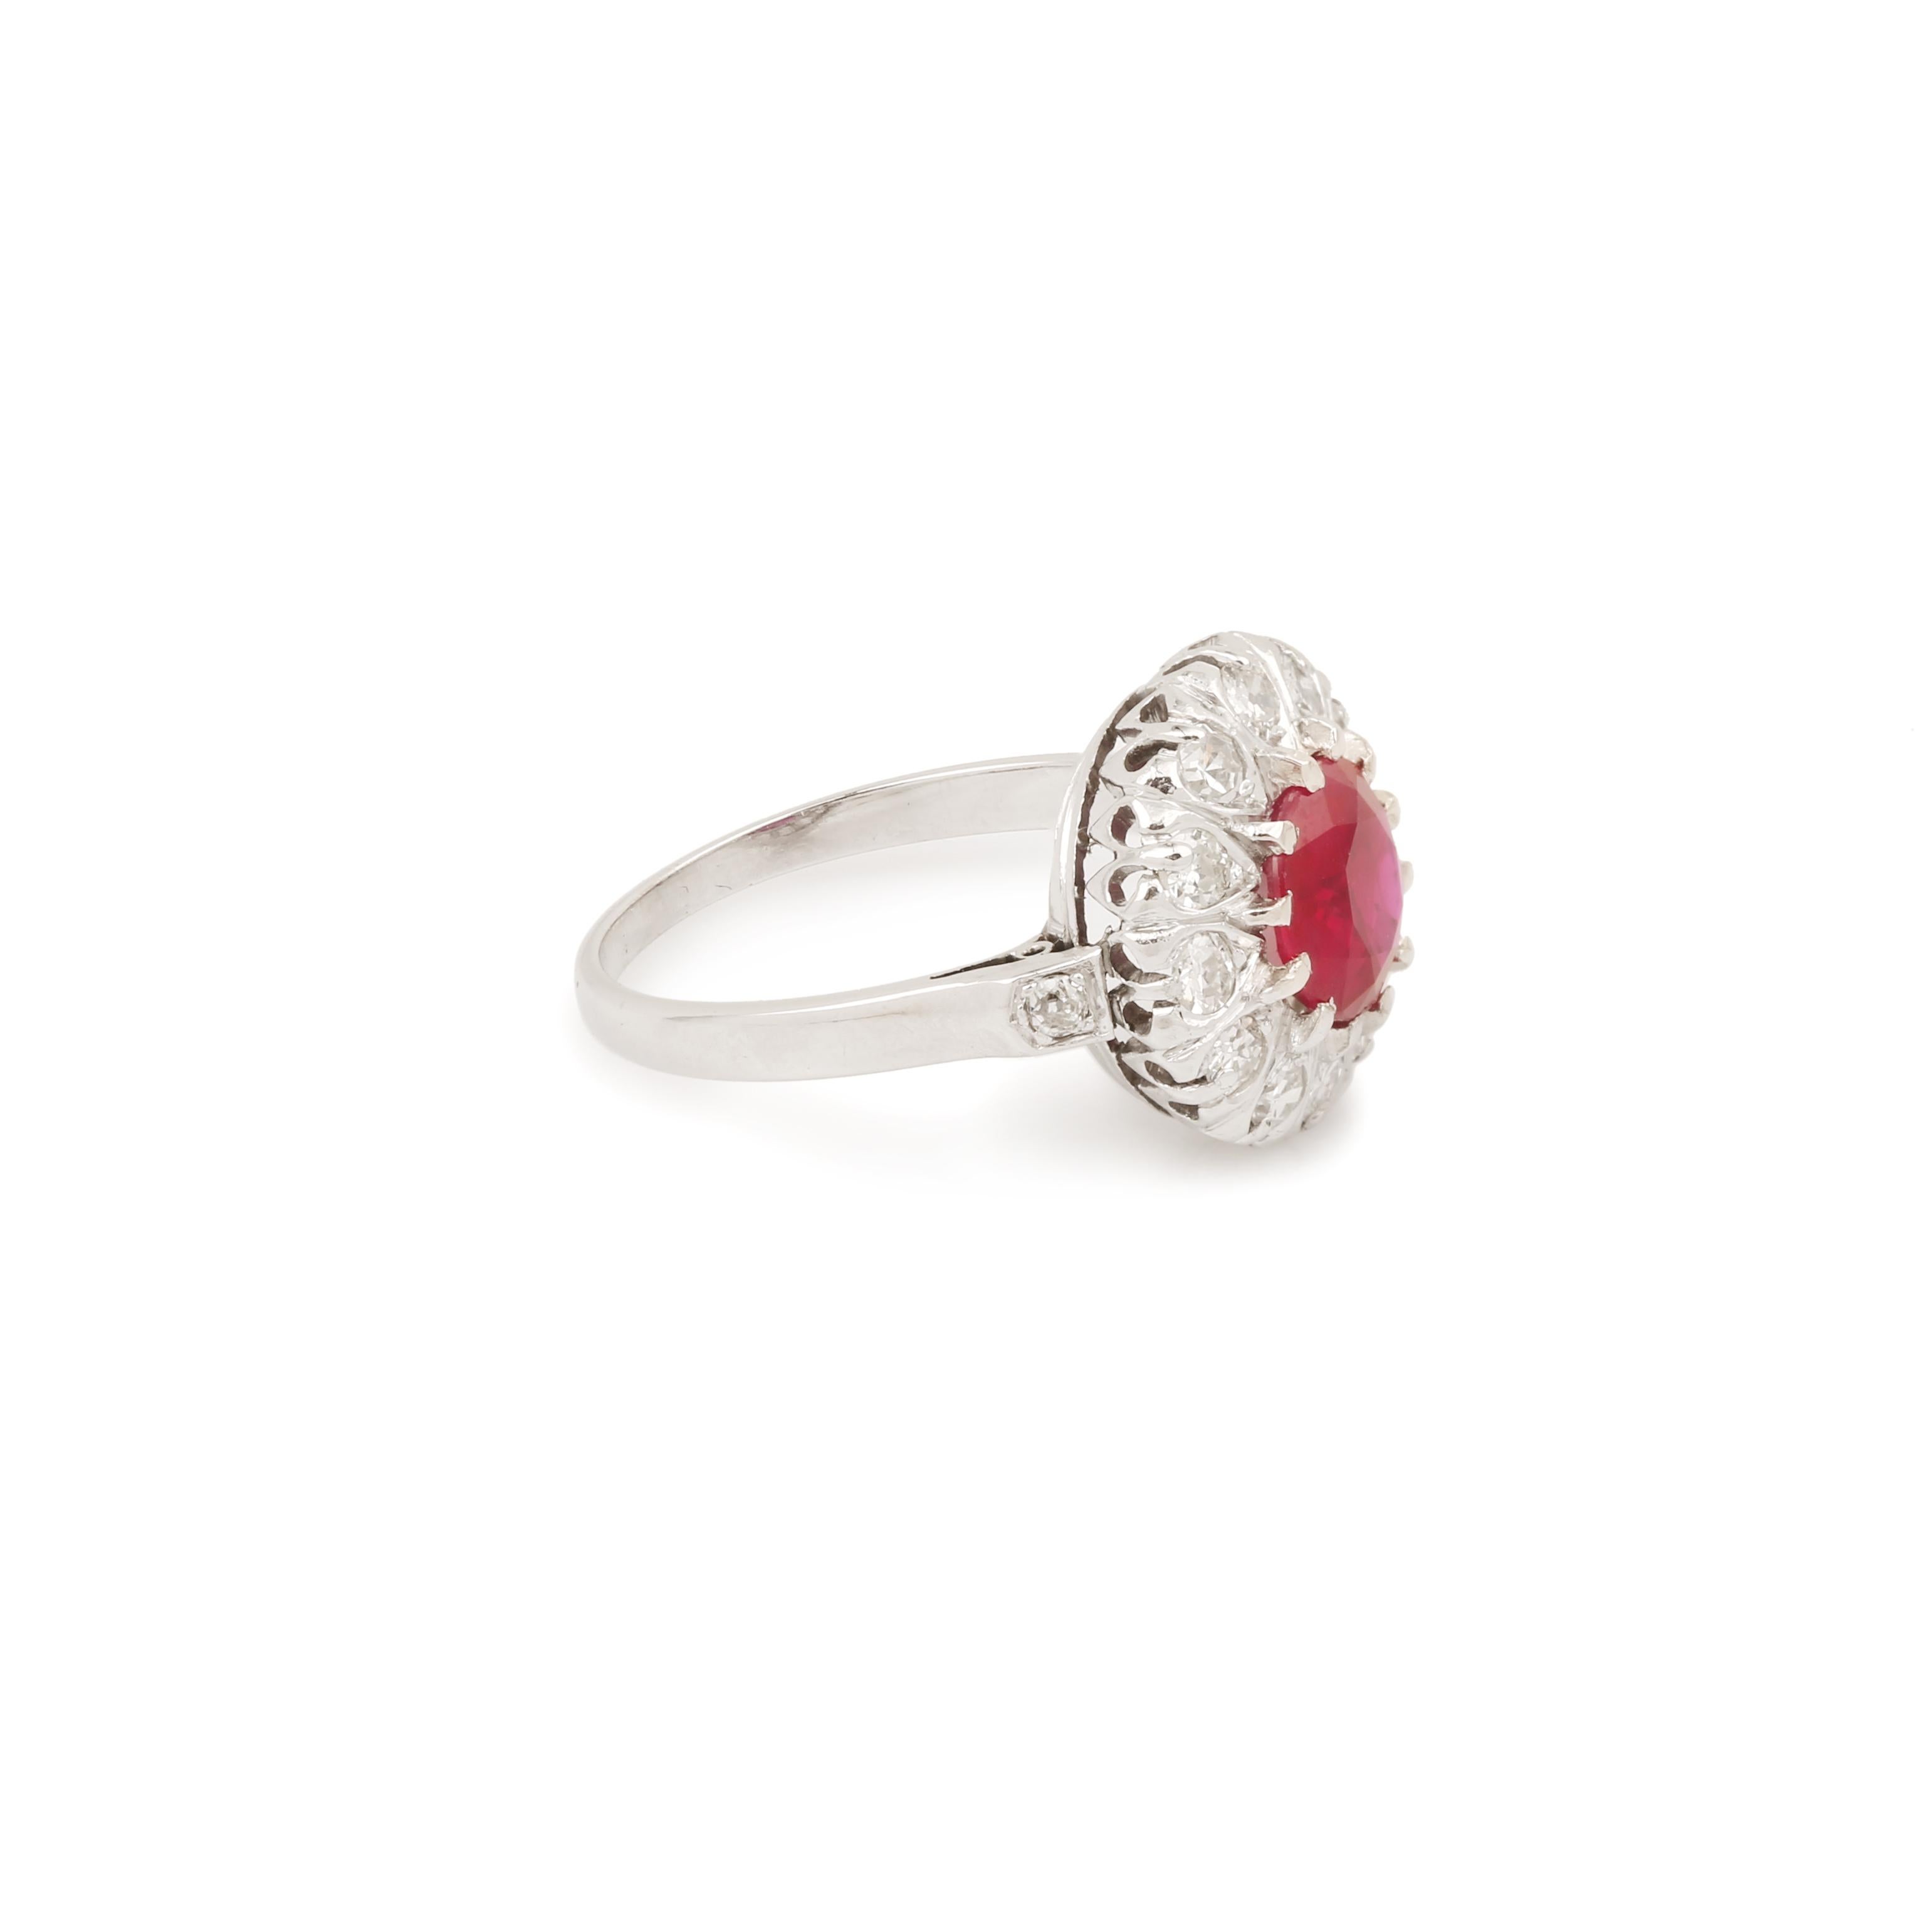 Exceptional daisy ring set in its center with a burmese ruby with a series of 12 diamonds on its outline and 2 diamonds on the shoulders.

Ruby weight: 2.08 carats

With Gem Paris certificate, specifying Natural Ruby, indication of heat treatment,